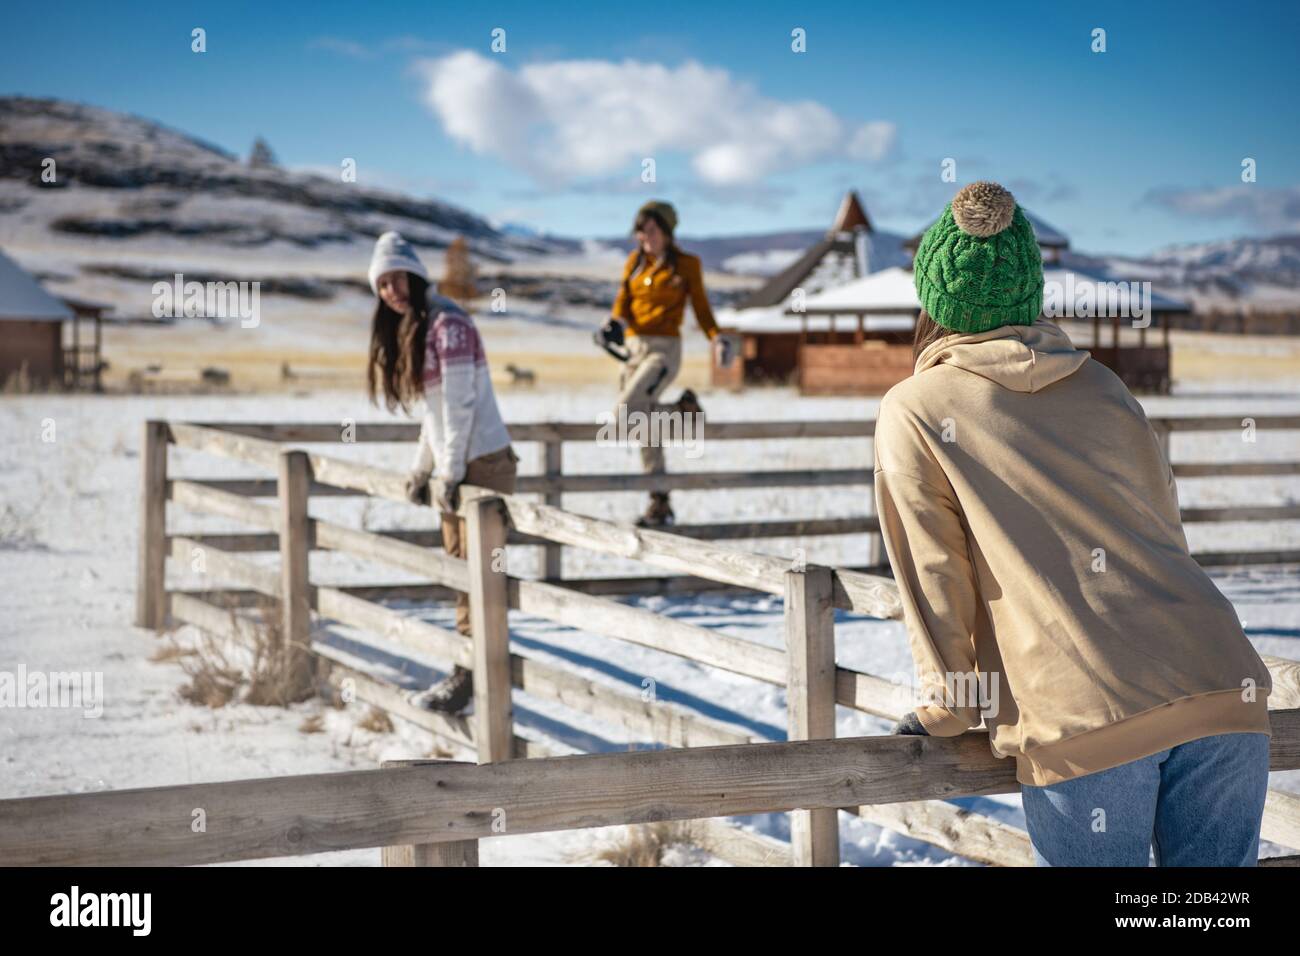 Three young girls friends are having fun at first snow in mountains. Winter vacations concept Stock Photo